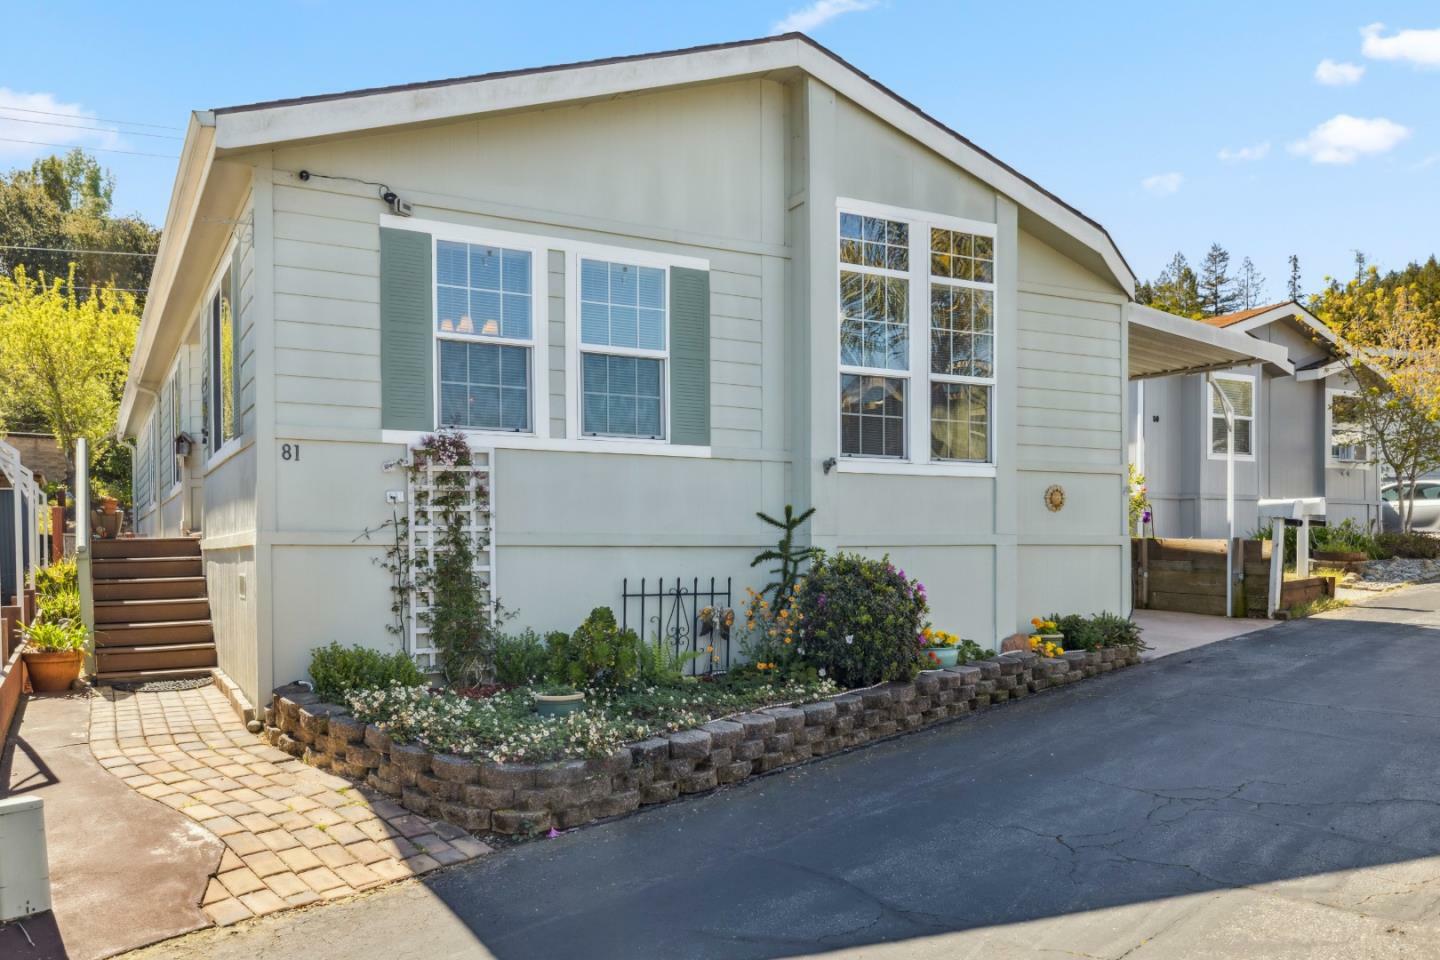 444 Whispering Pines Drive 81  Scotts Valley CA 95066 photo